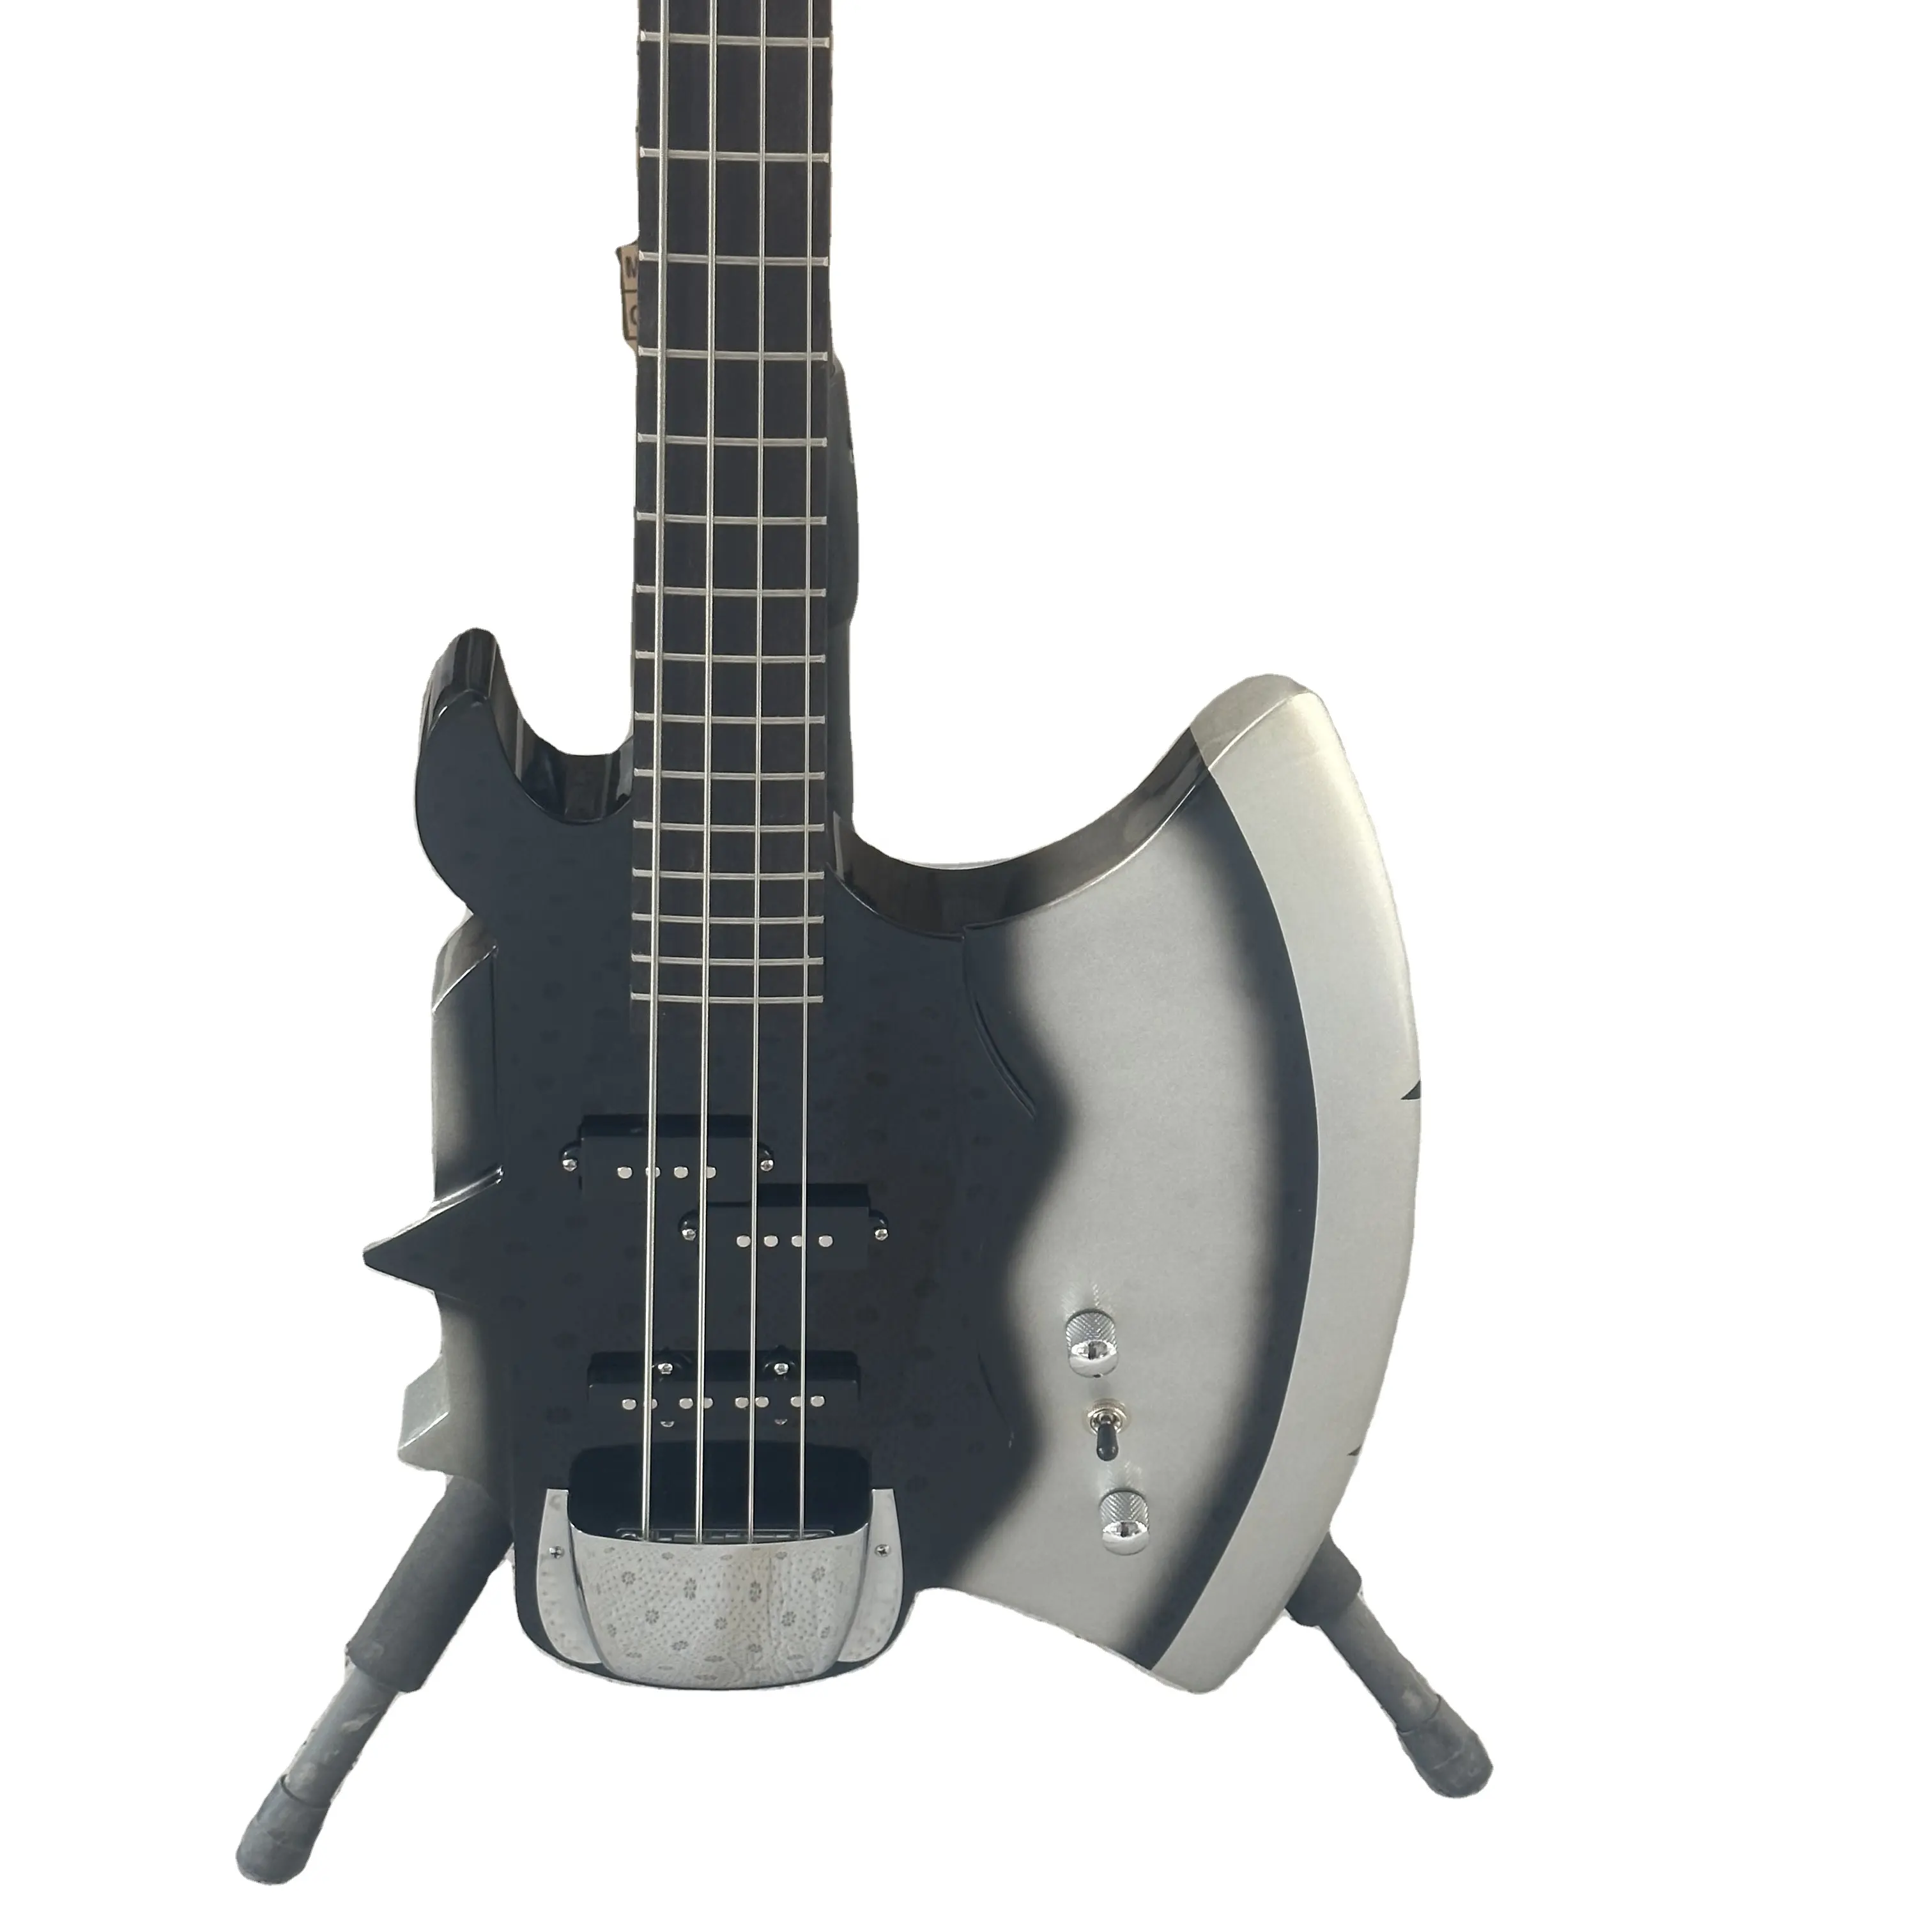 Axe Electric Bass 4 Strings Body Solid Wood With Signature Fast Shipping Ebony Fingerboard